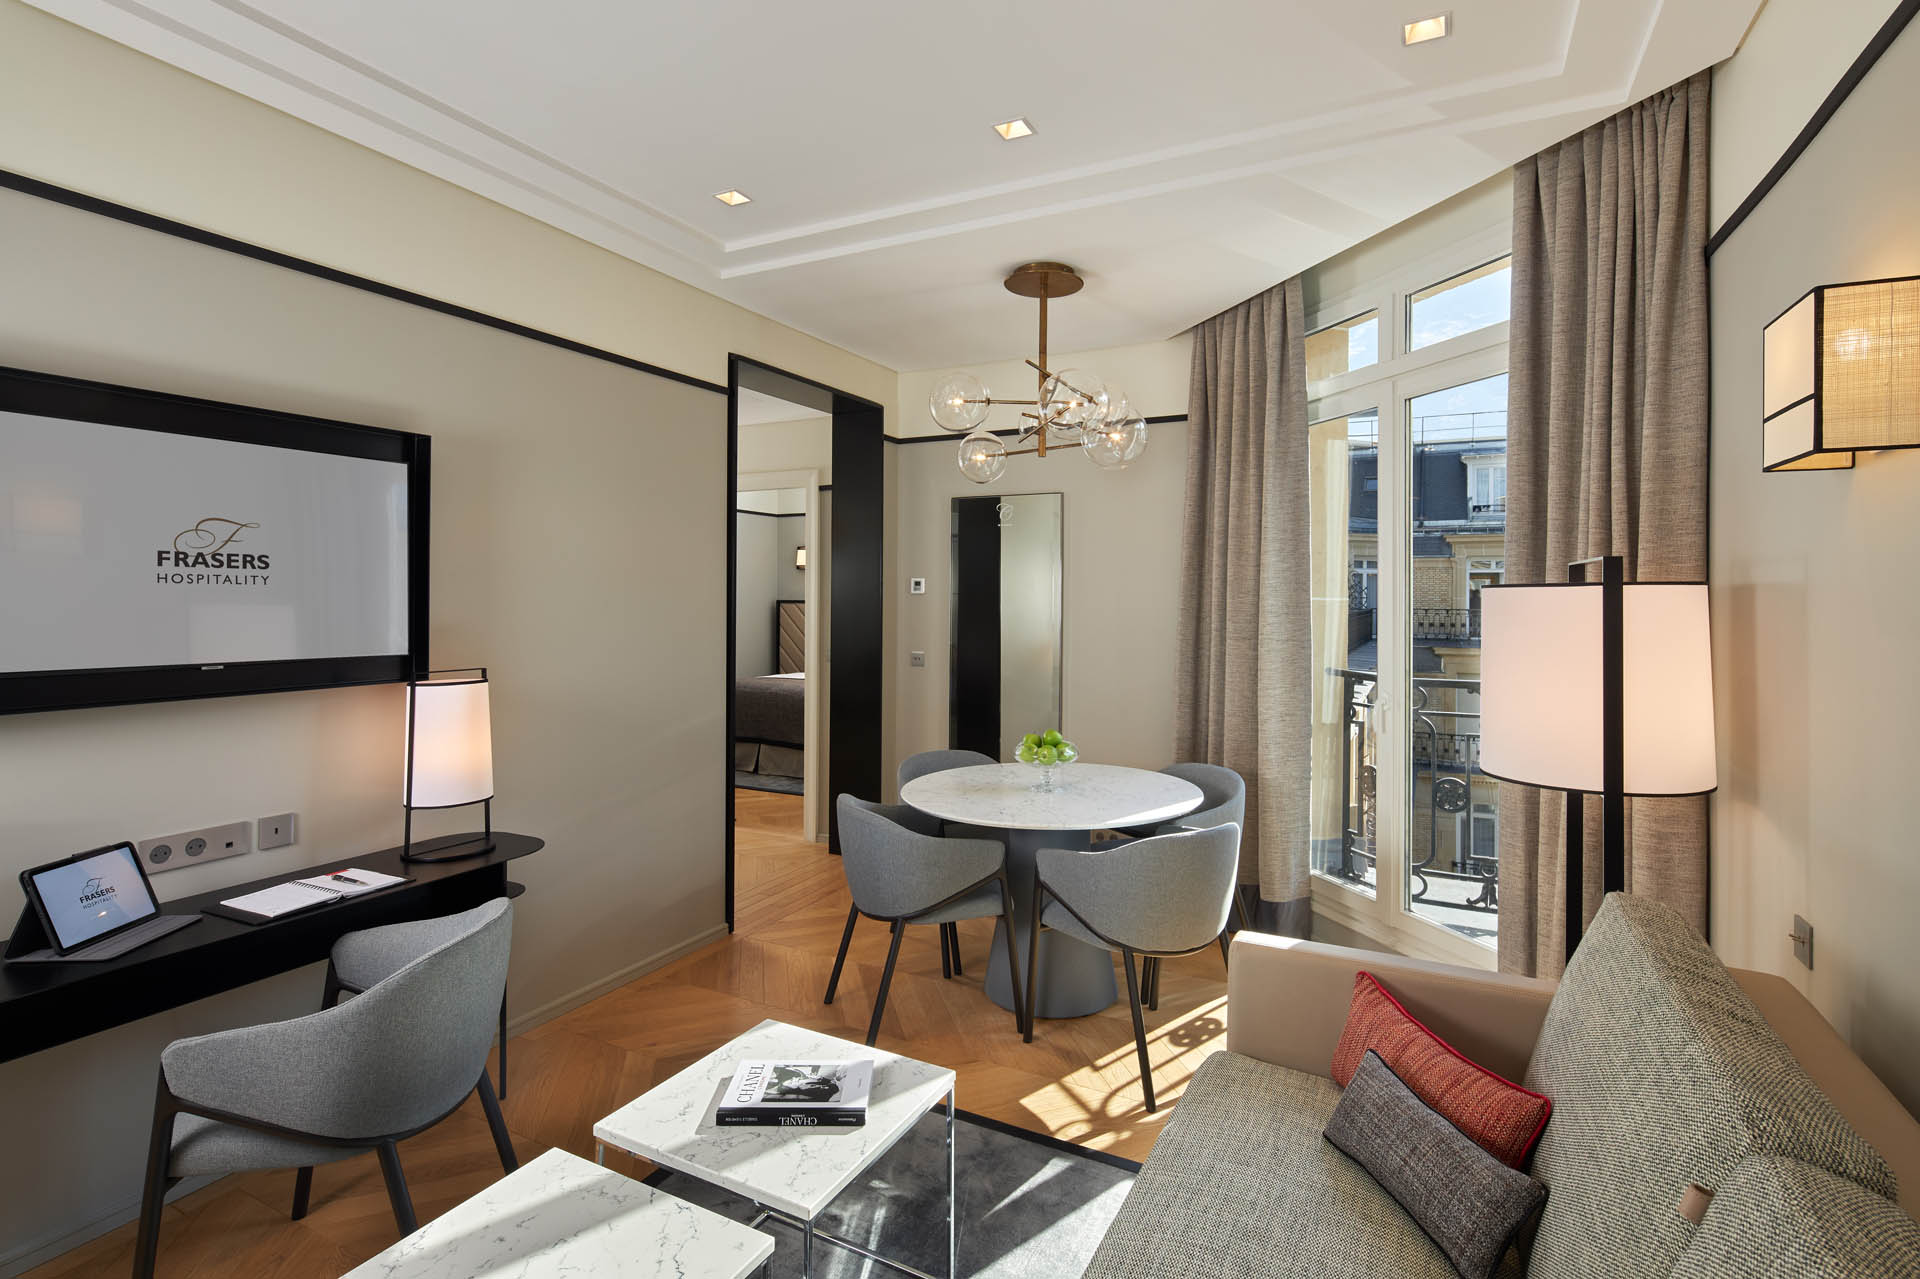 Overview of One Bedroom Premier Suite, Serviced Apartment In Paris